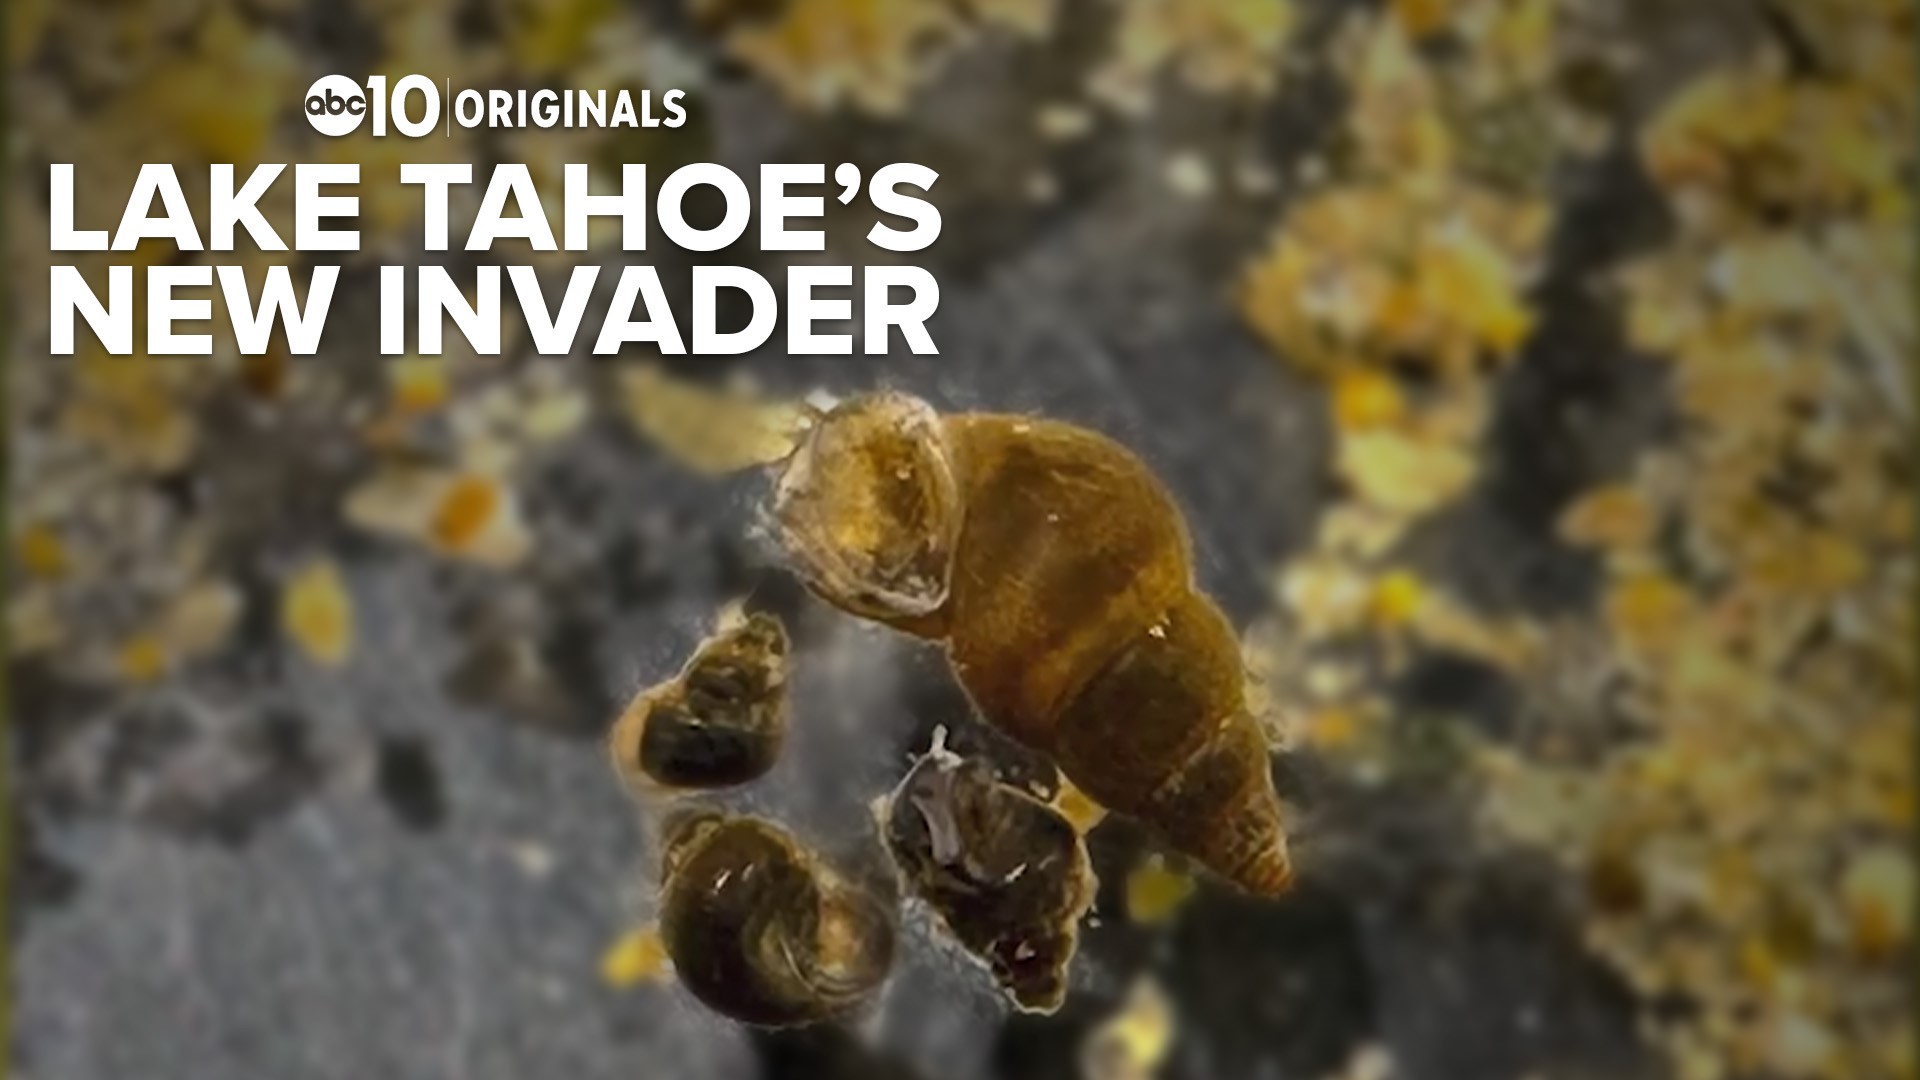 They may be tiny but these invaders from New Zealand could cause huge problems for Lake Tahoe.